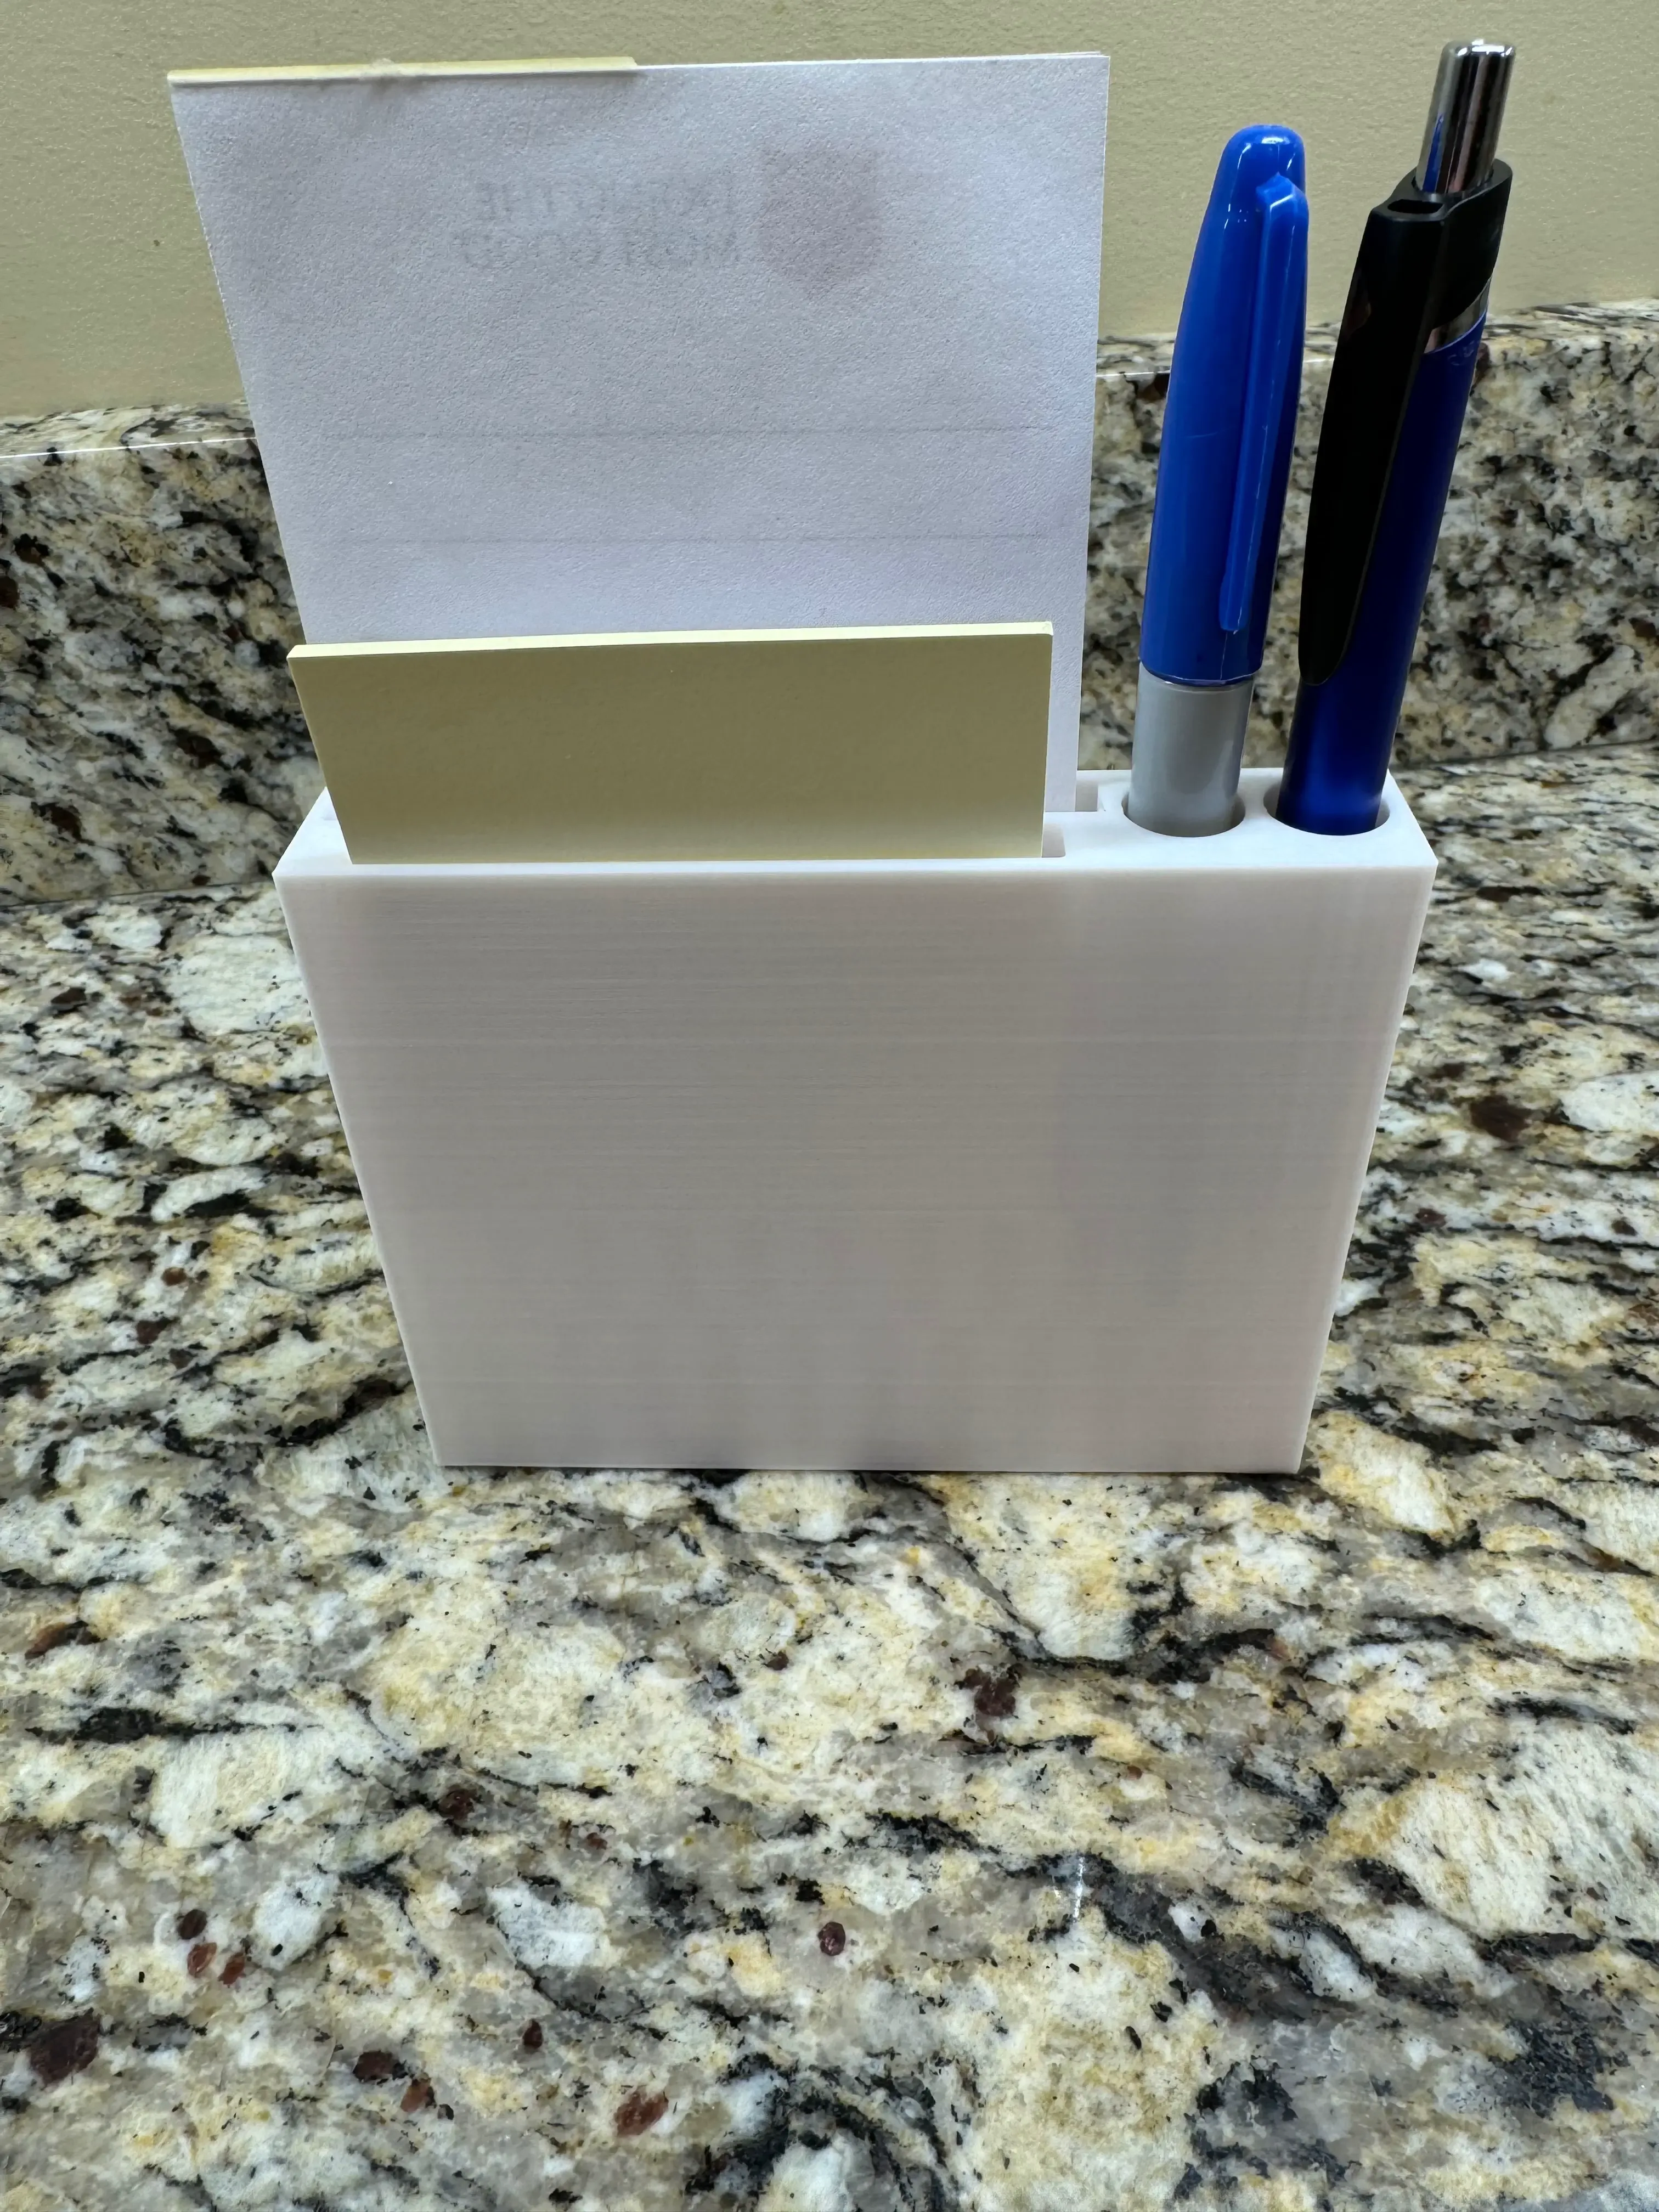 Post it note and pen holder